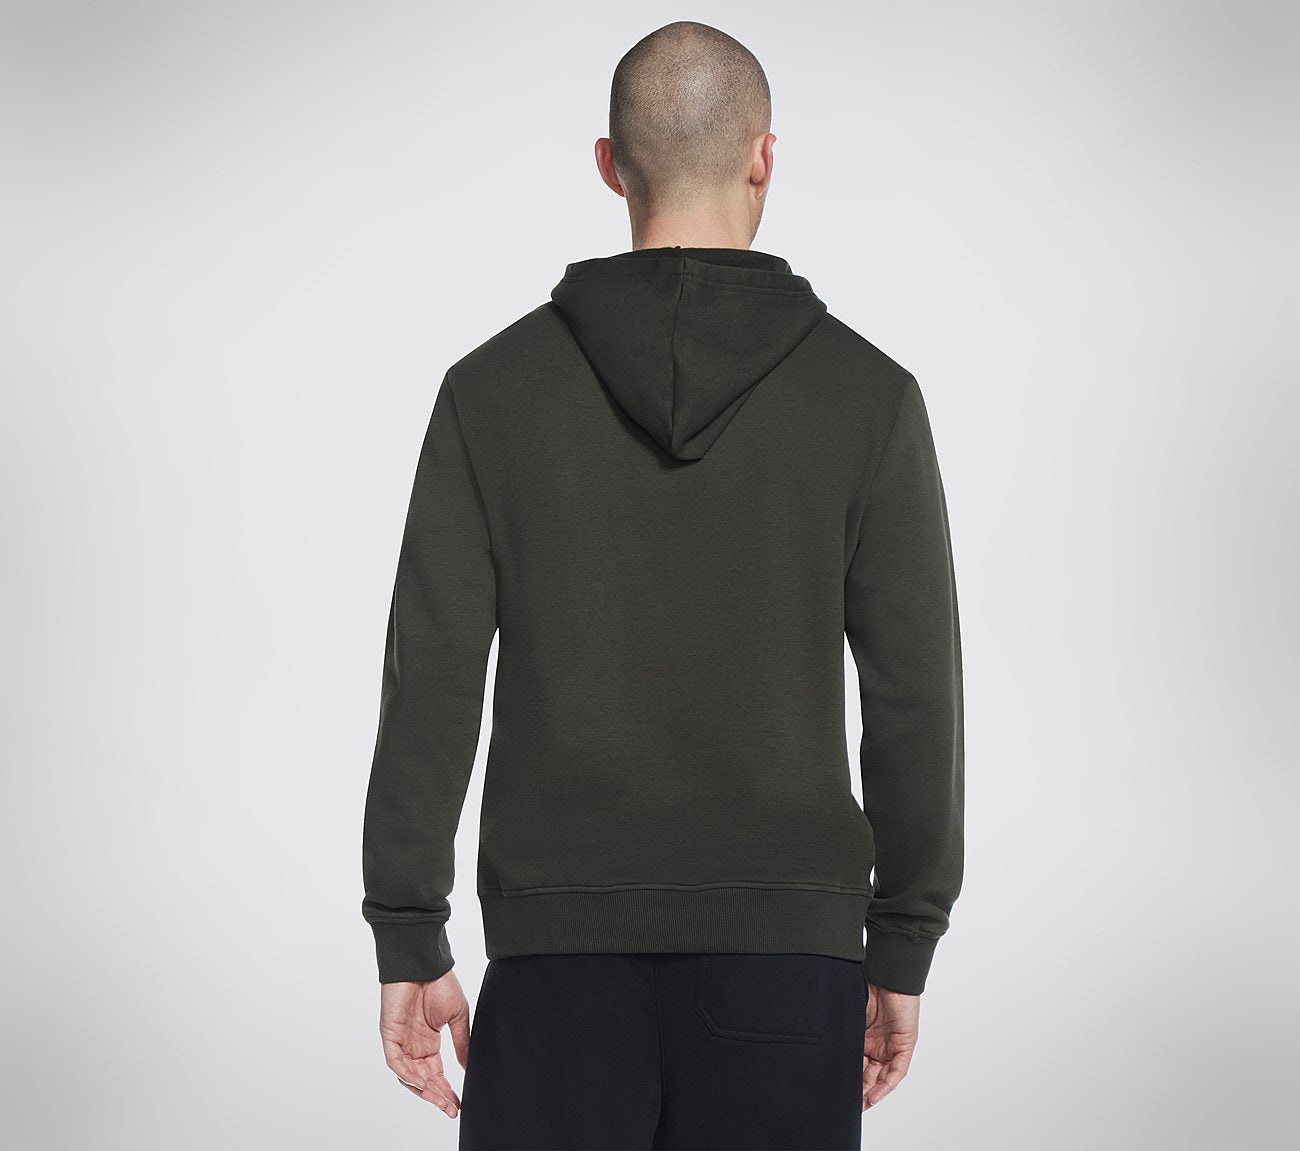 Skech-Sweats Incognito Hoodie